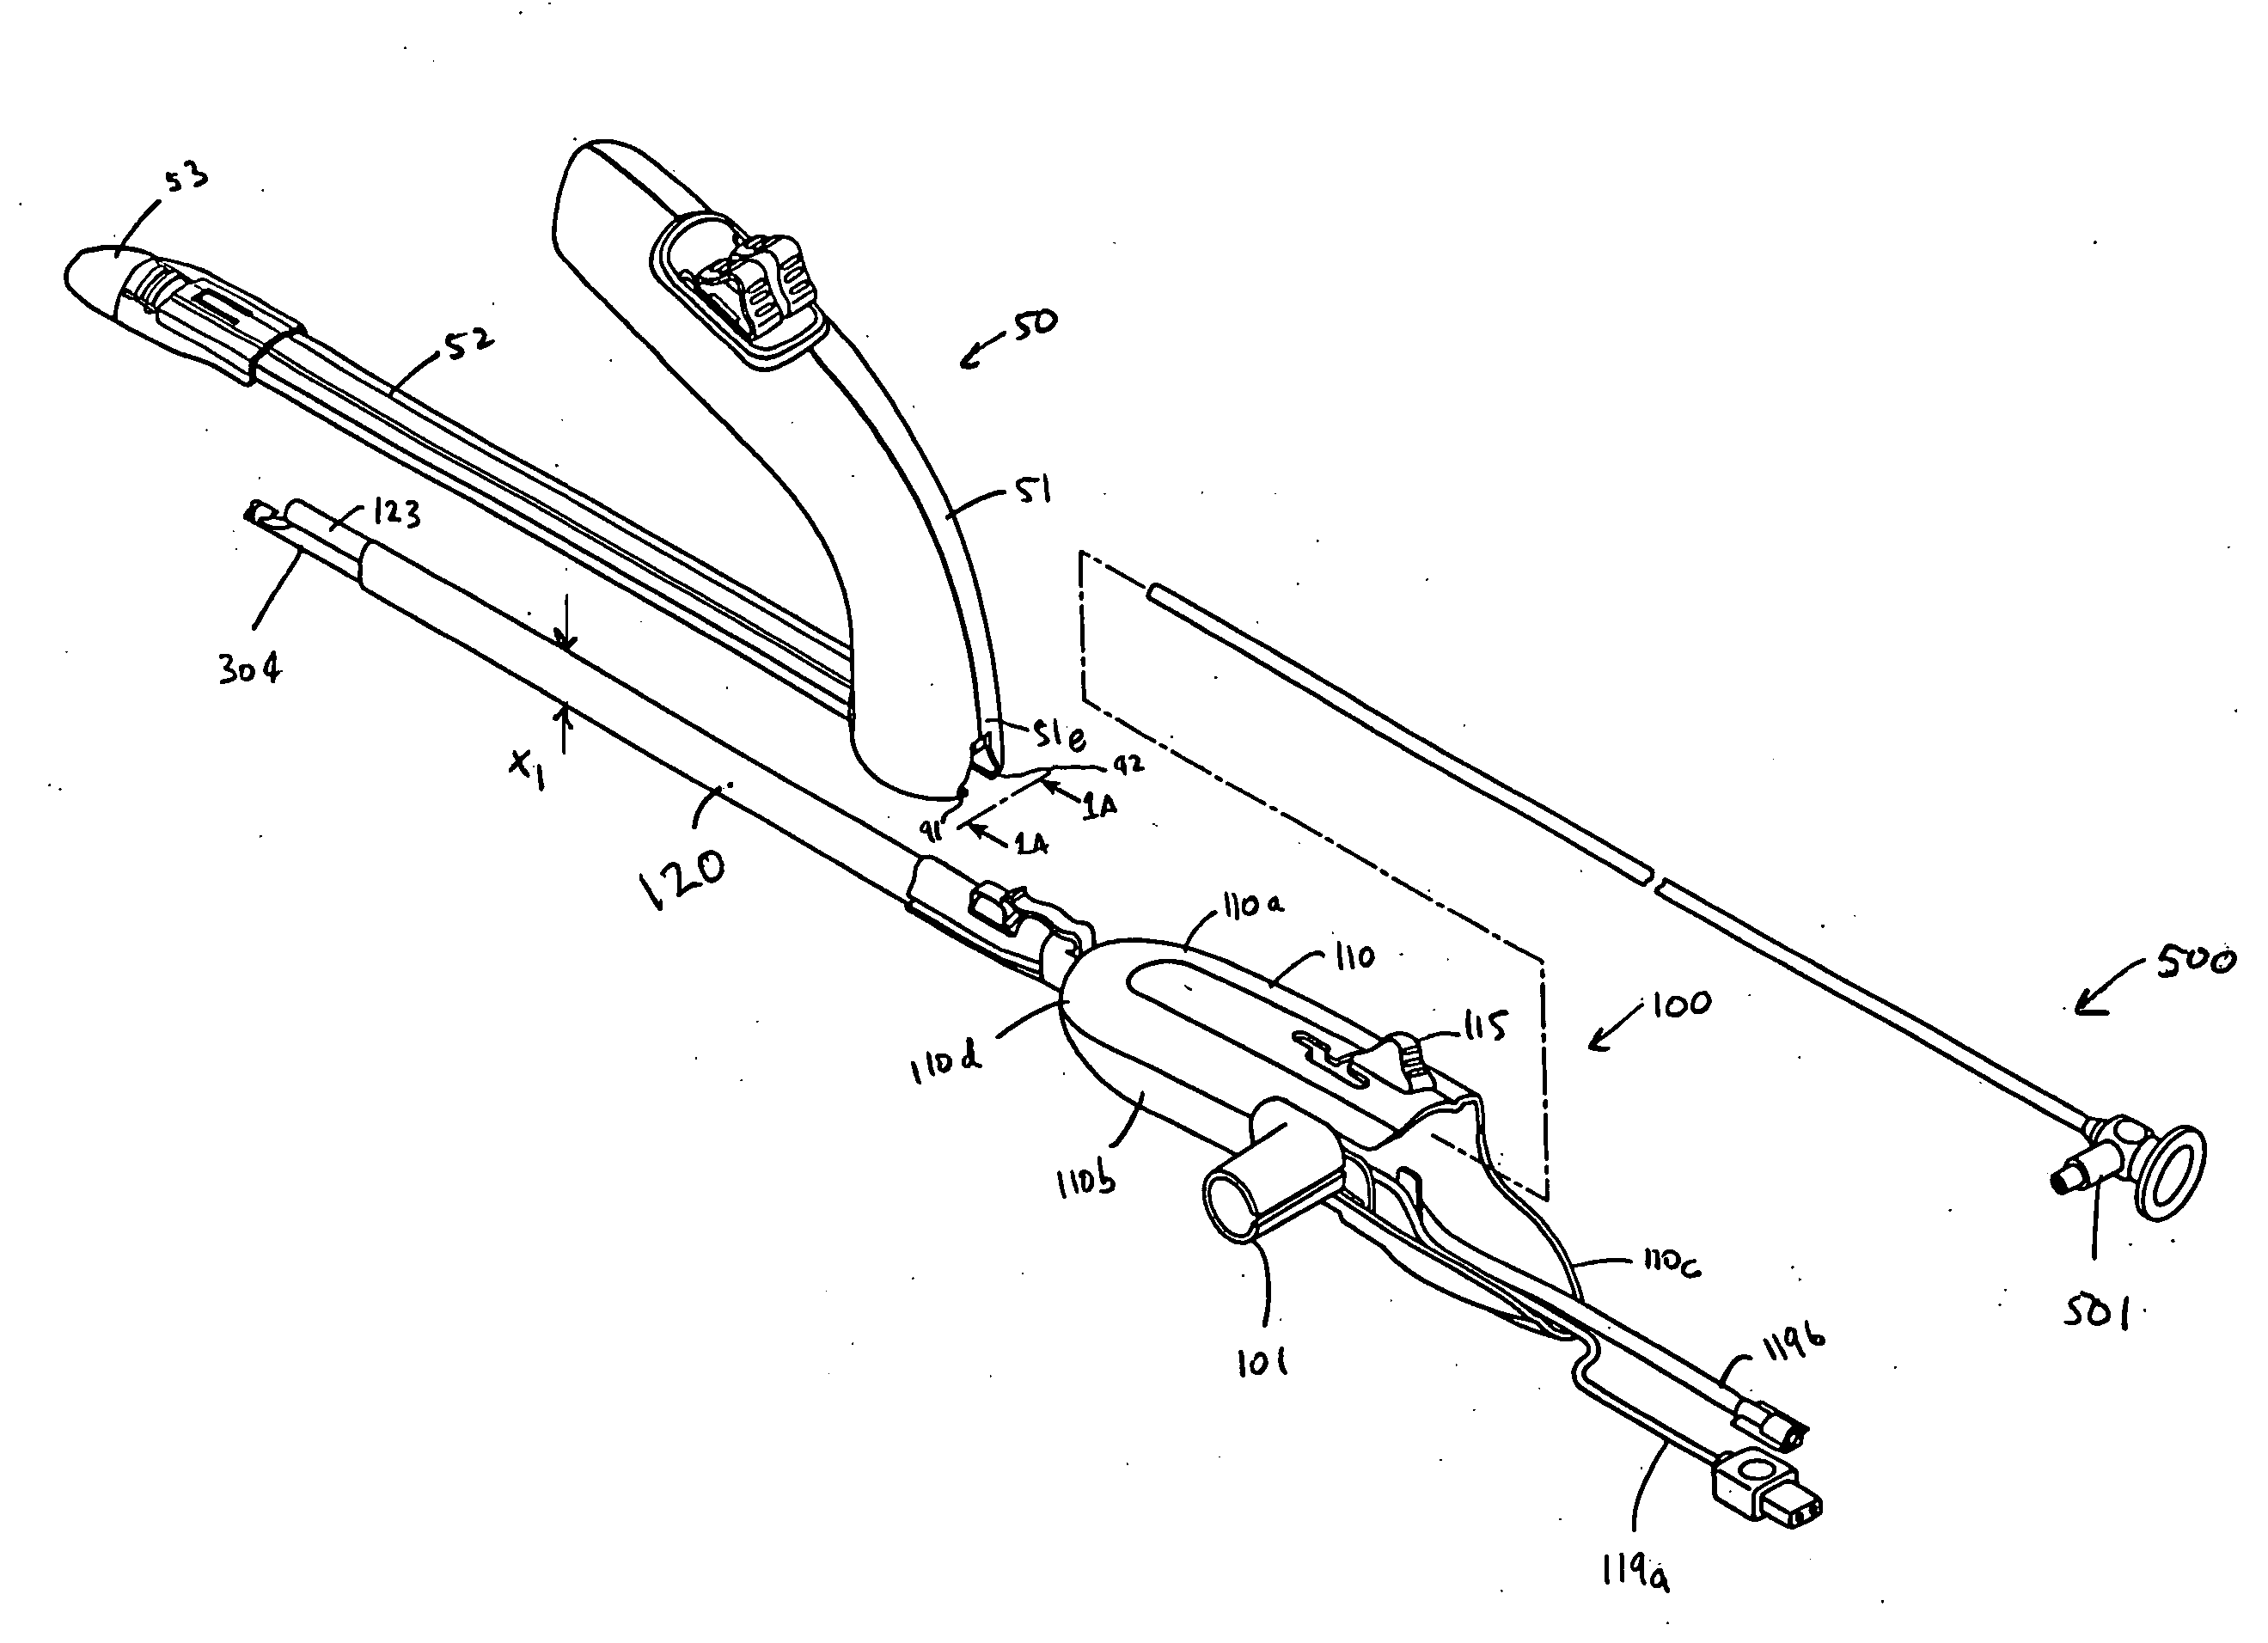 Multitool surgical device